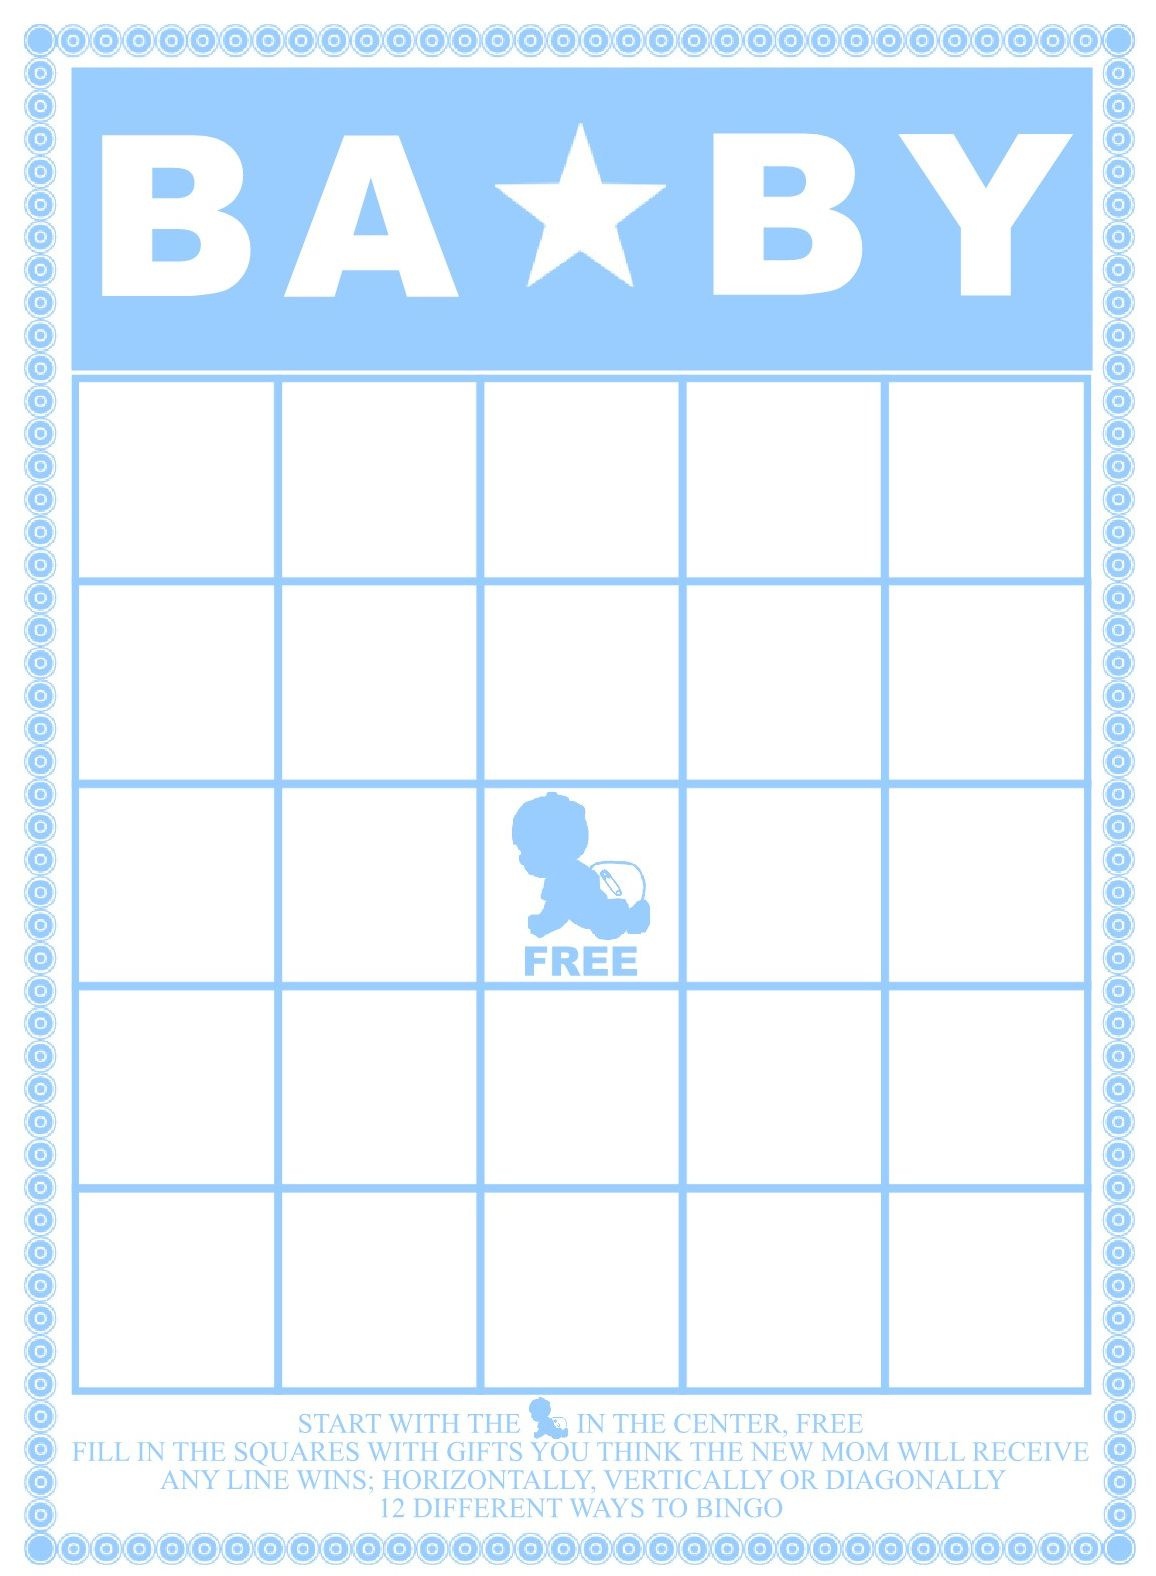 50 Free Printable Baby Bingo Cards (74+ Images In Collection) Page 1 - 50 Free Printable Baby Bingo Cards